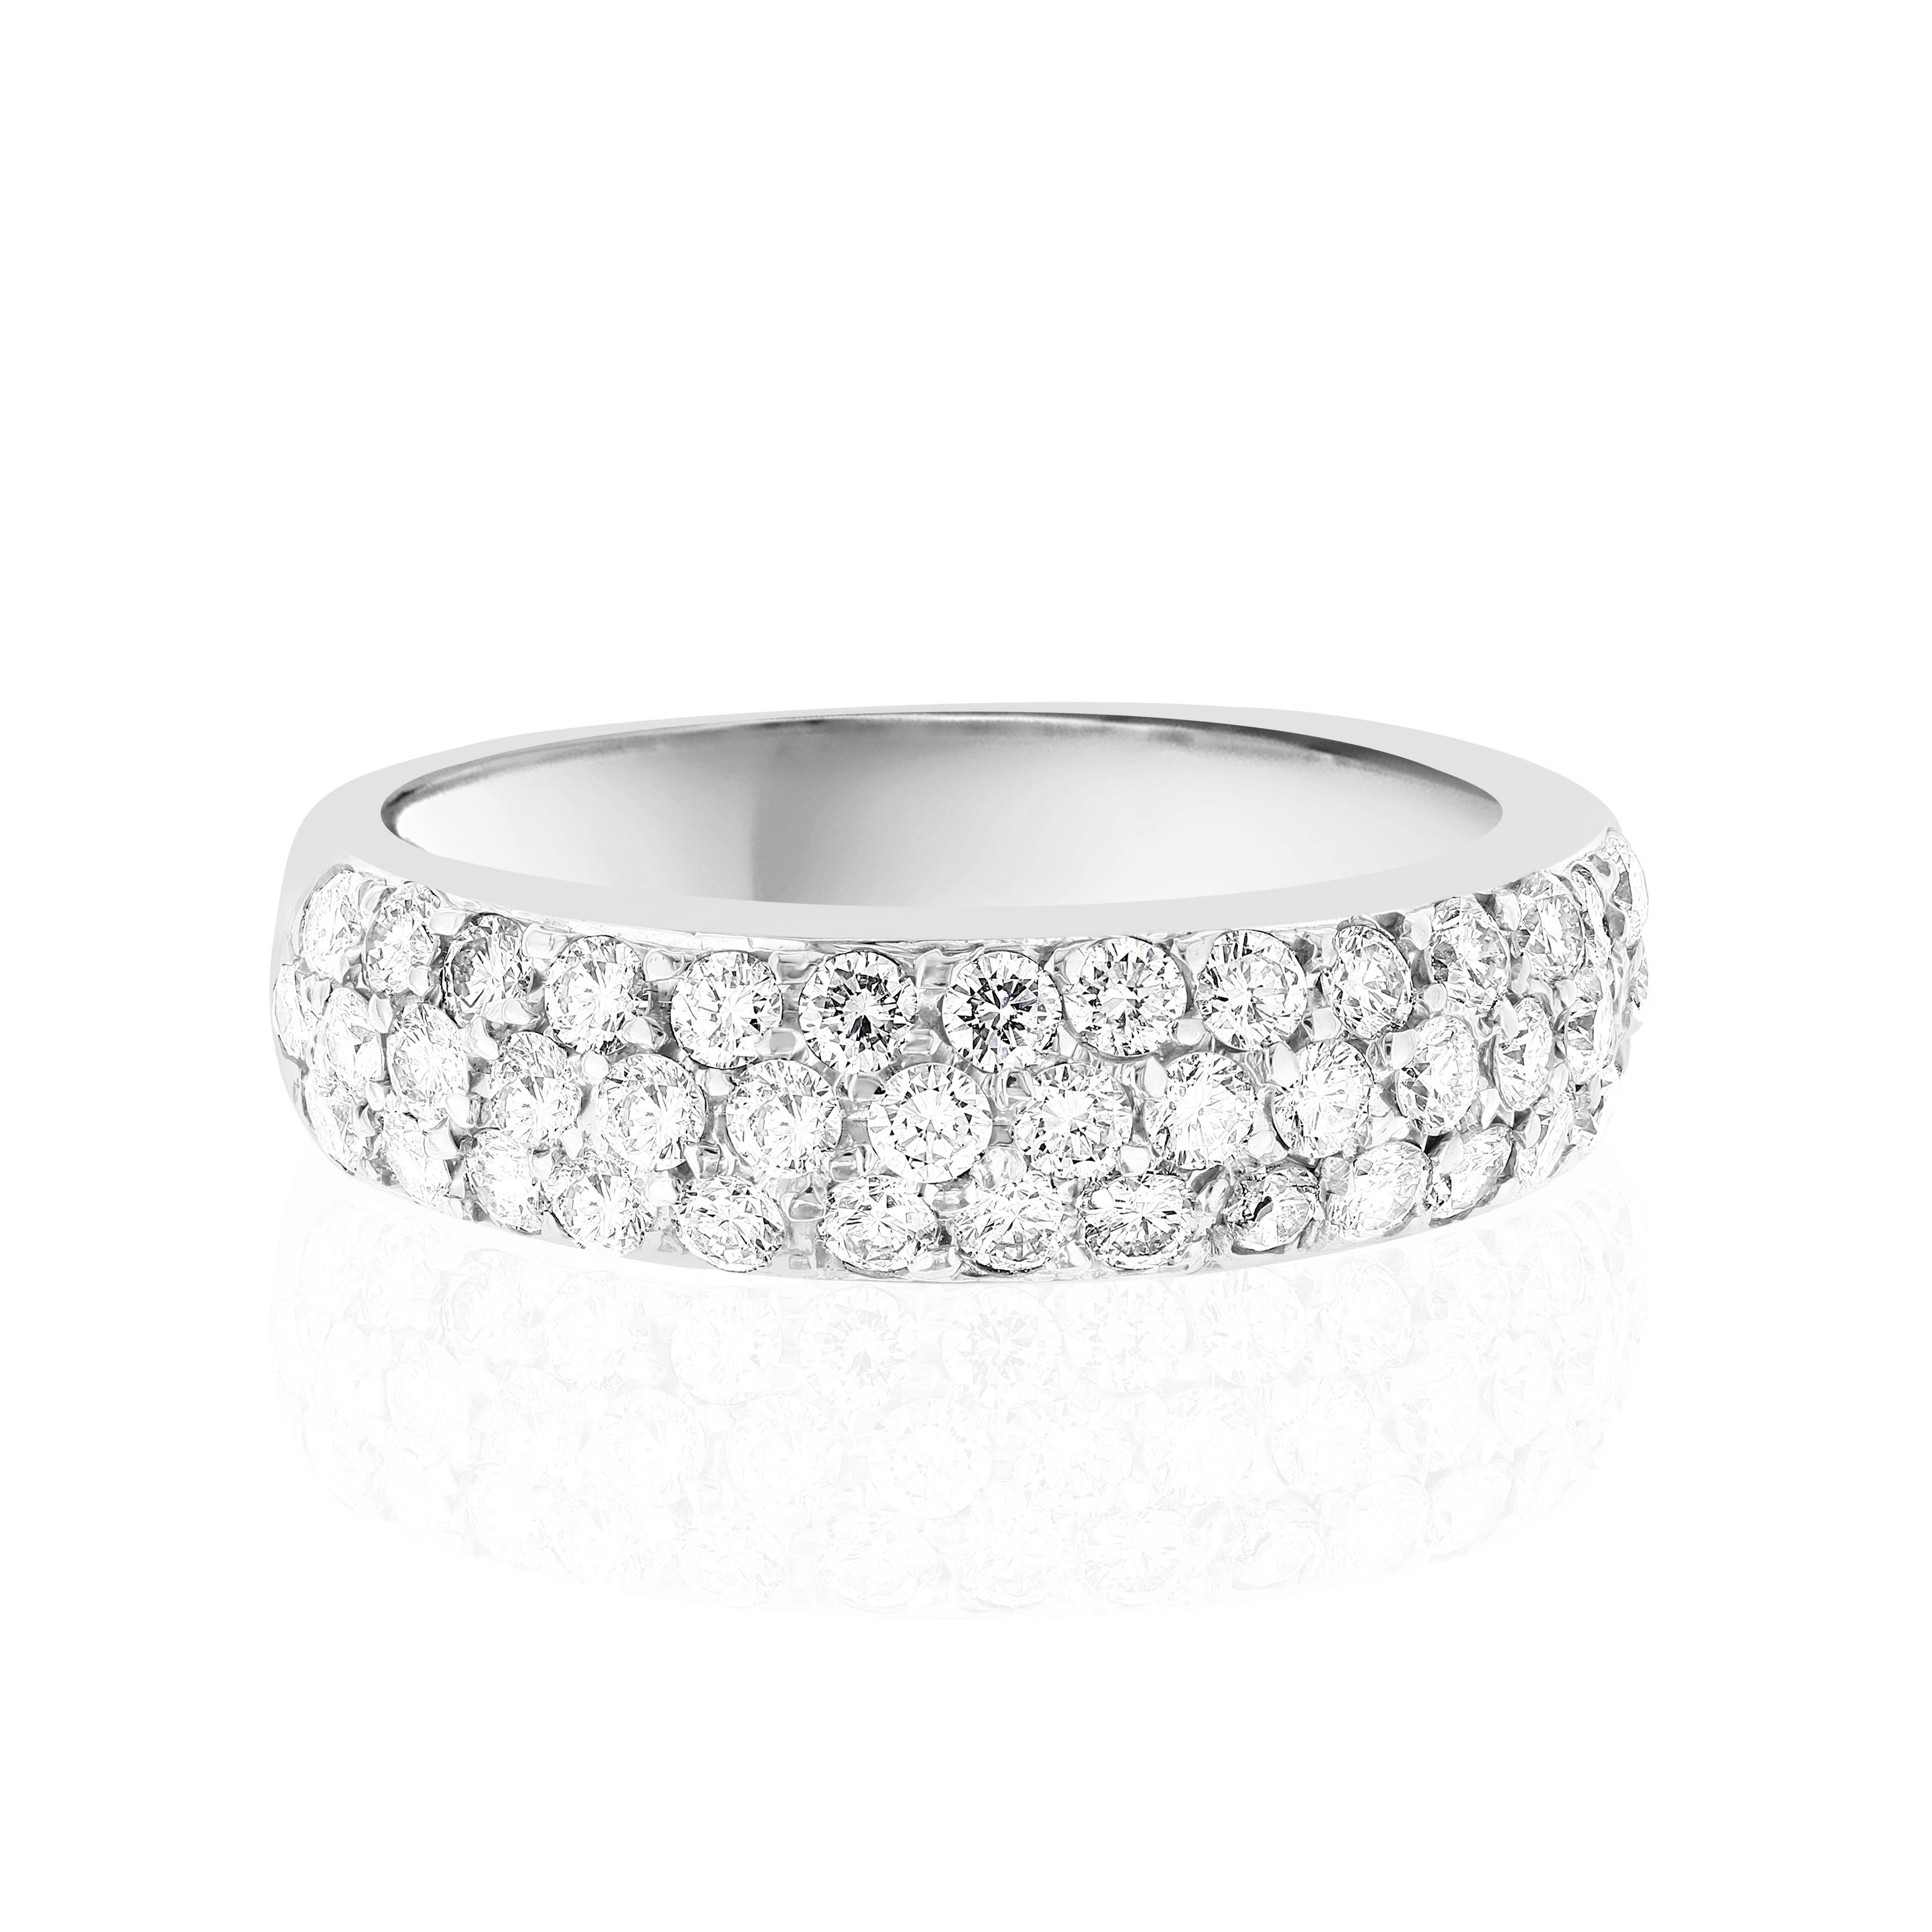 Domed 3 Row Diamond Band.

1.07 Carats set in Platinum.

Size 6.